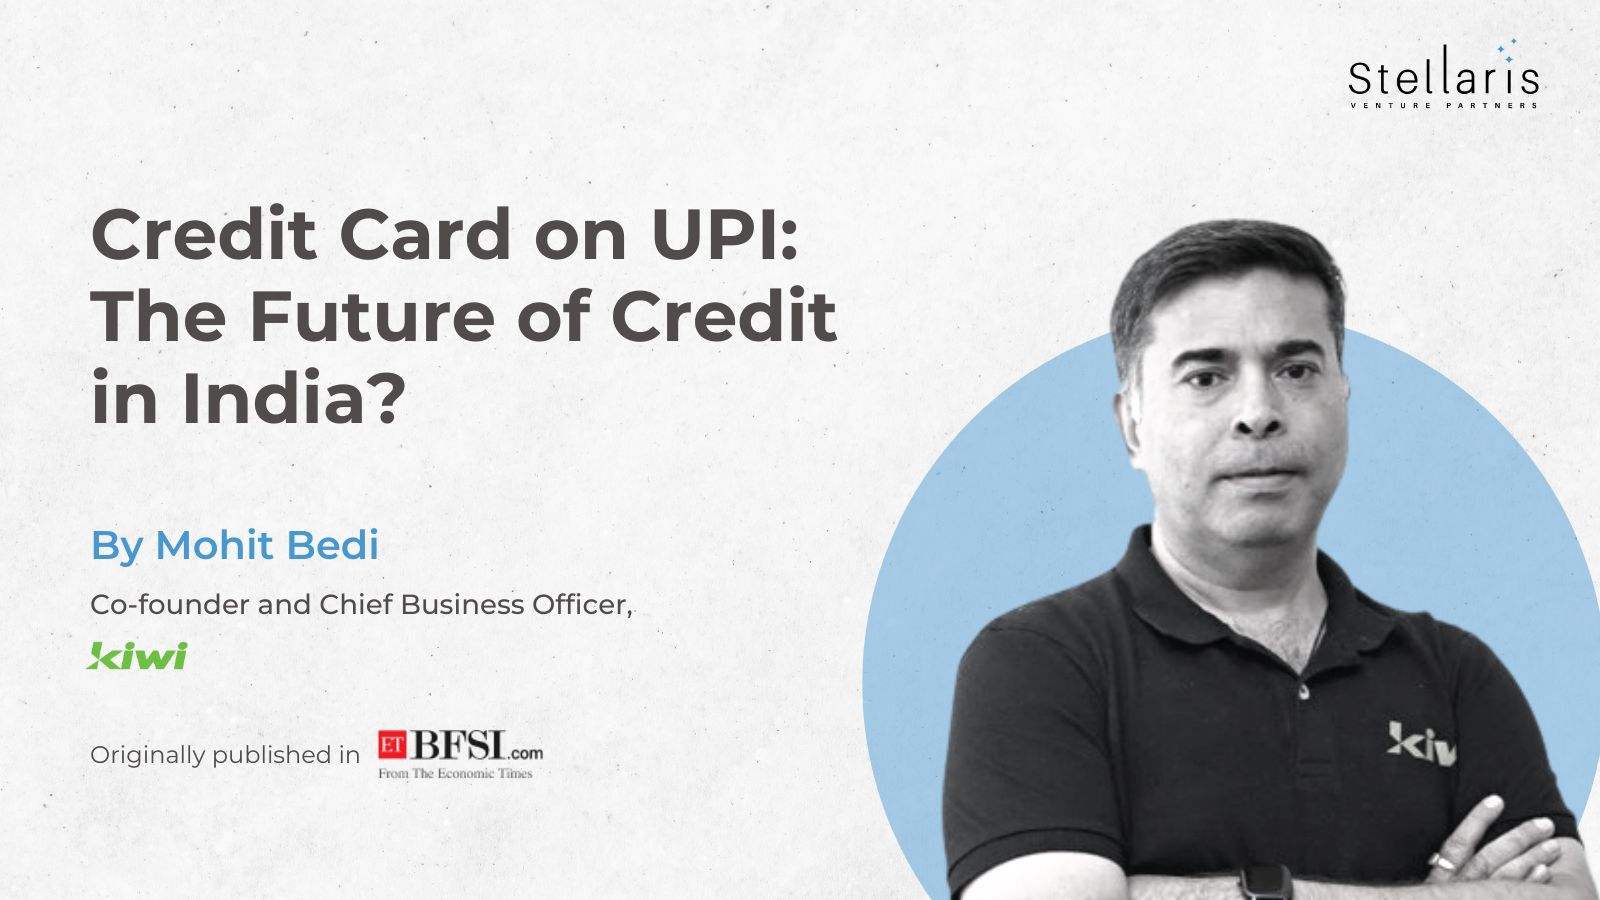 Credit Card on UPI: The Future of Credit in India?